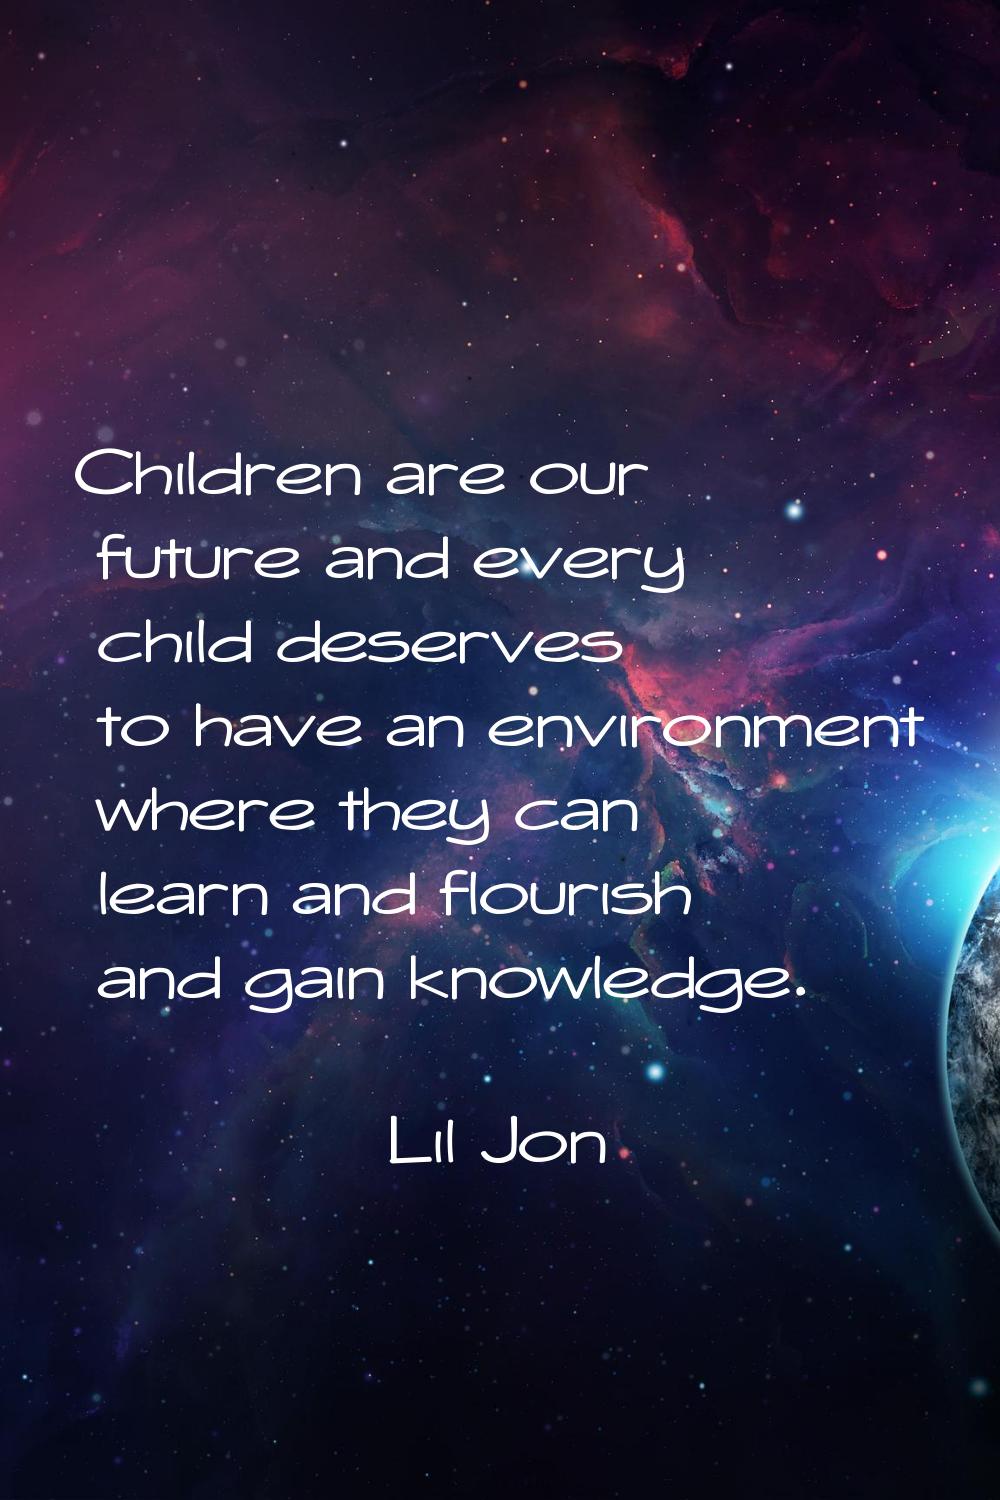 Children are our future and every child deserves to have an environment where they can learn and fl